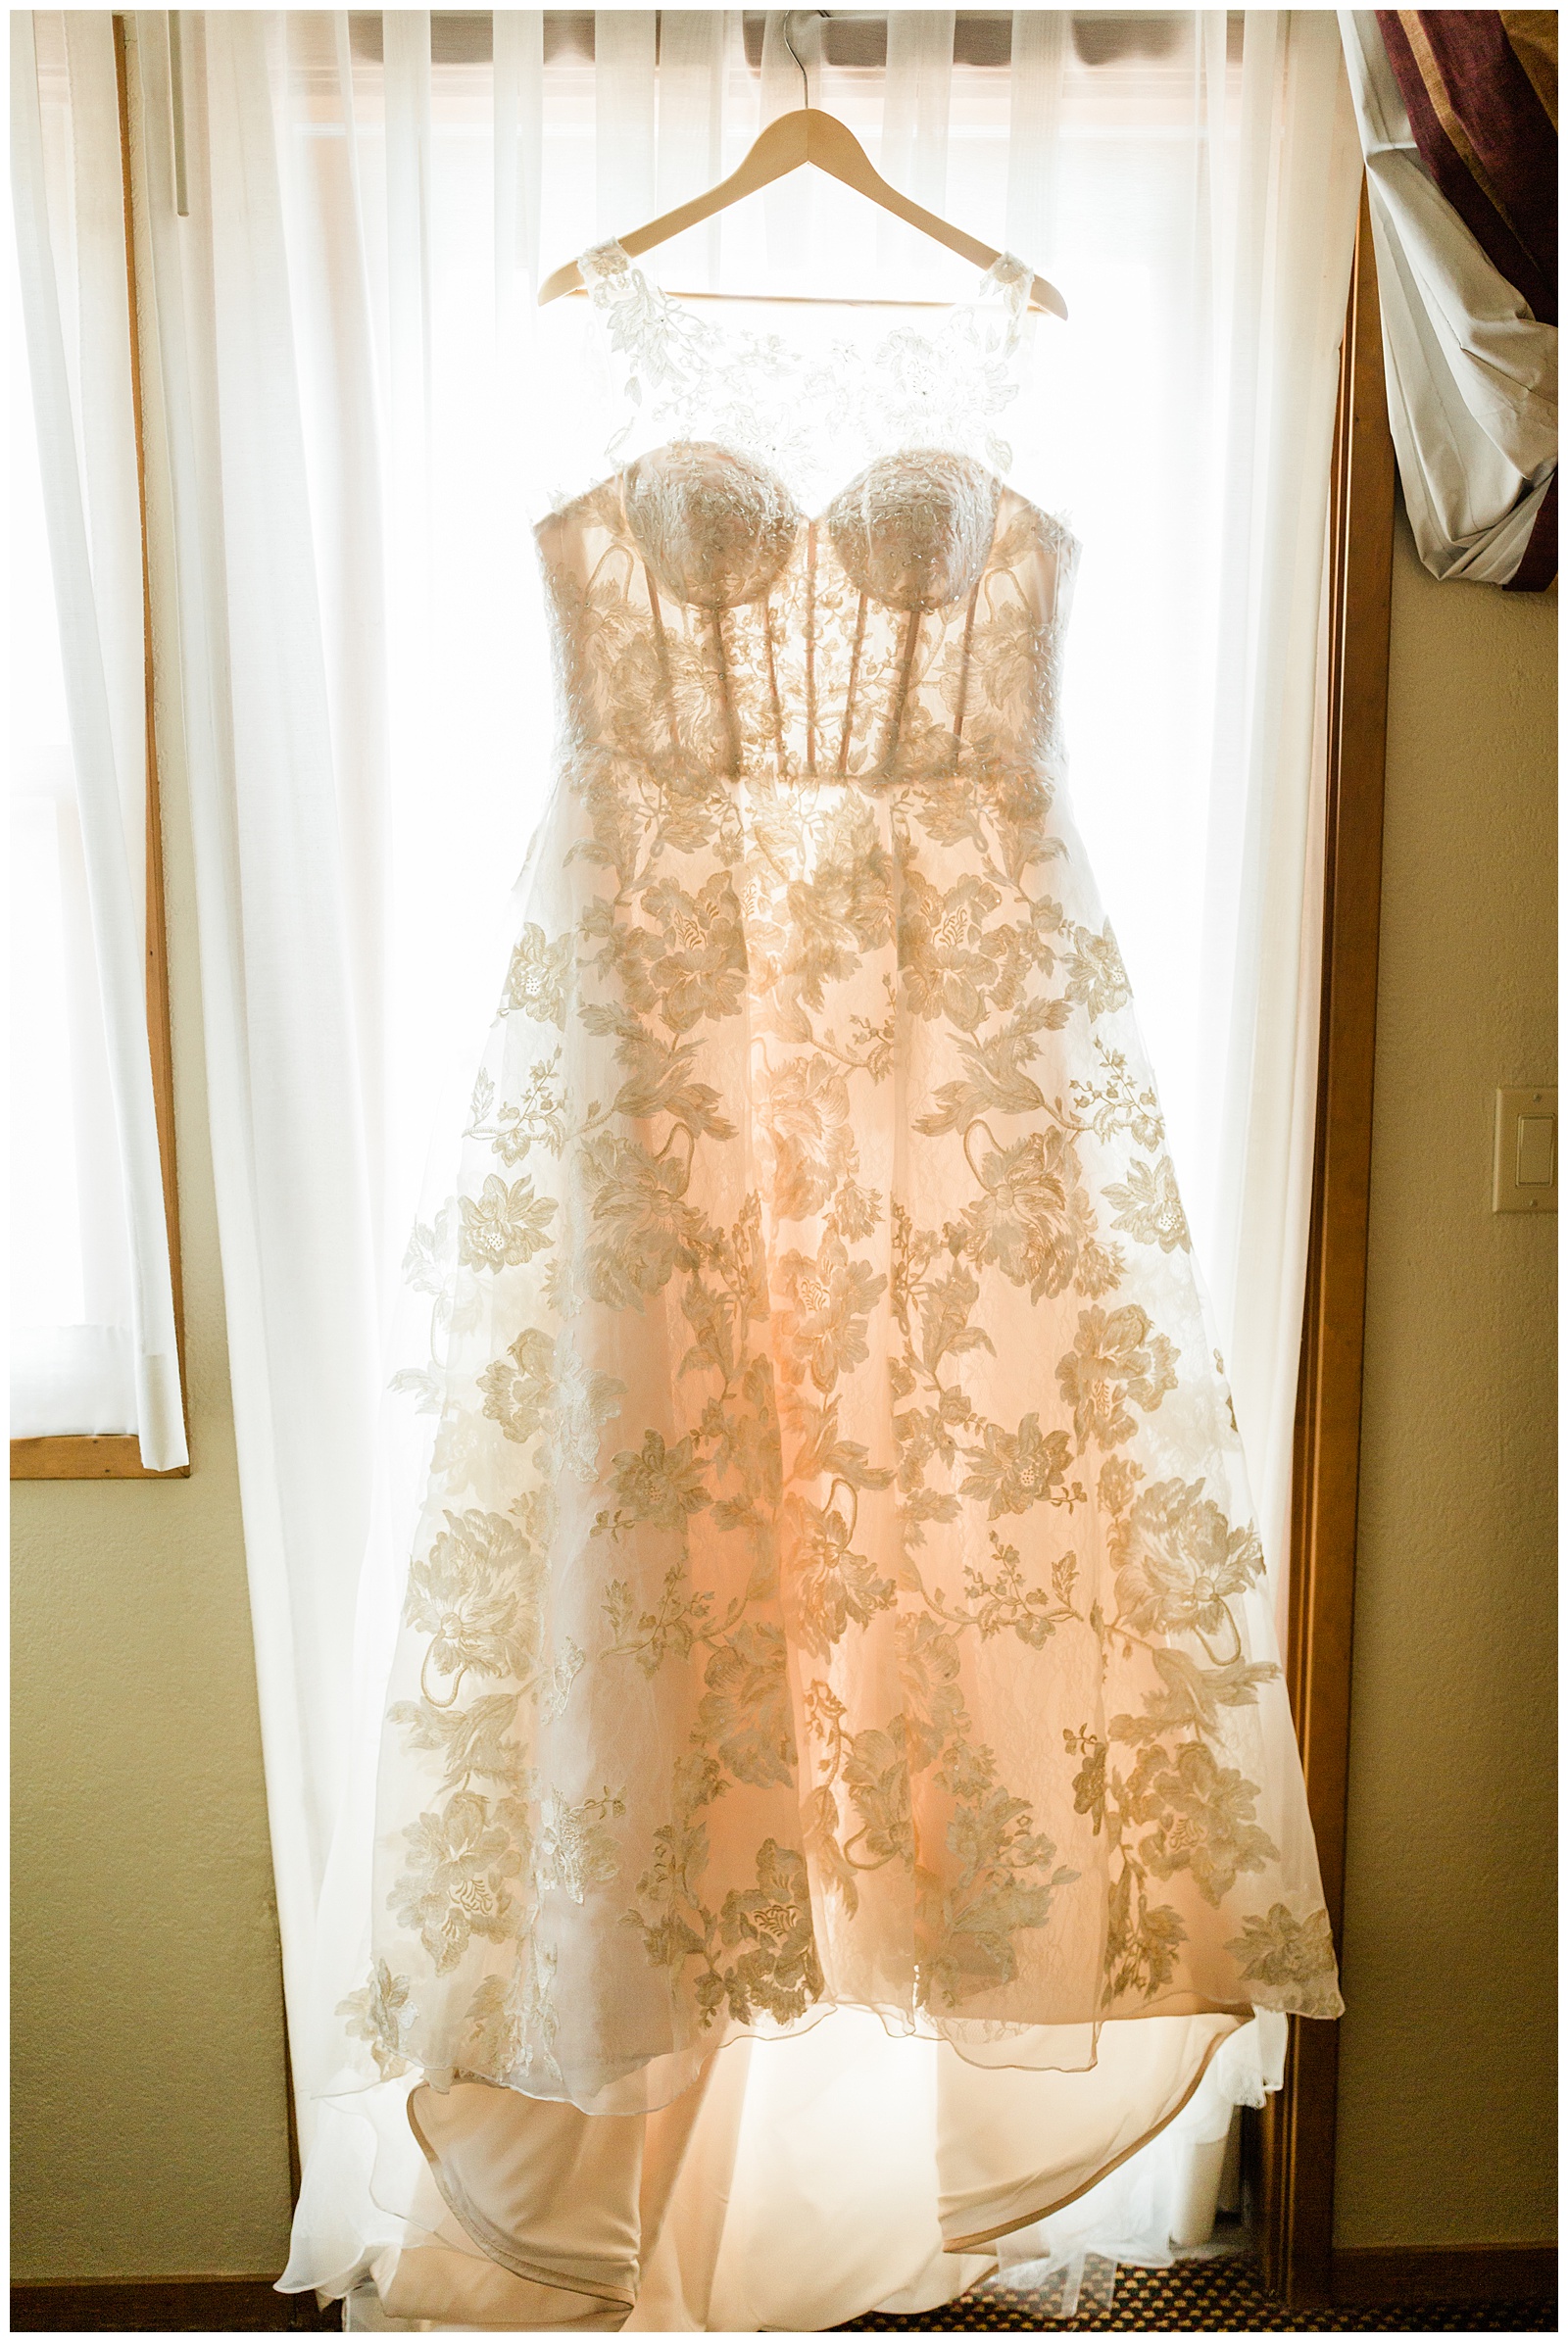 wedding dress hanging in front of a window